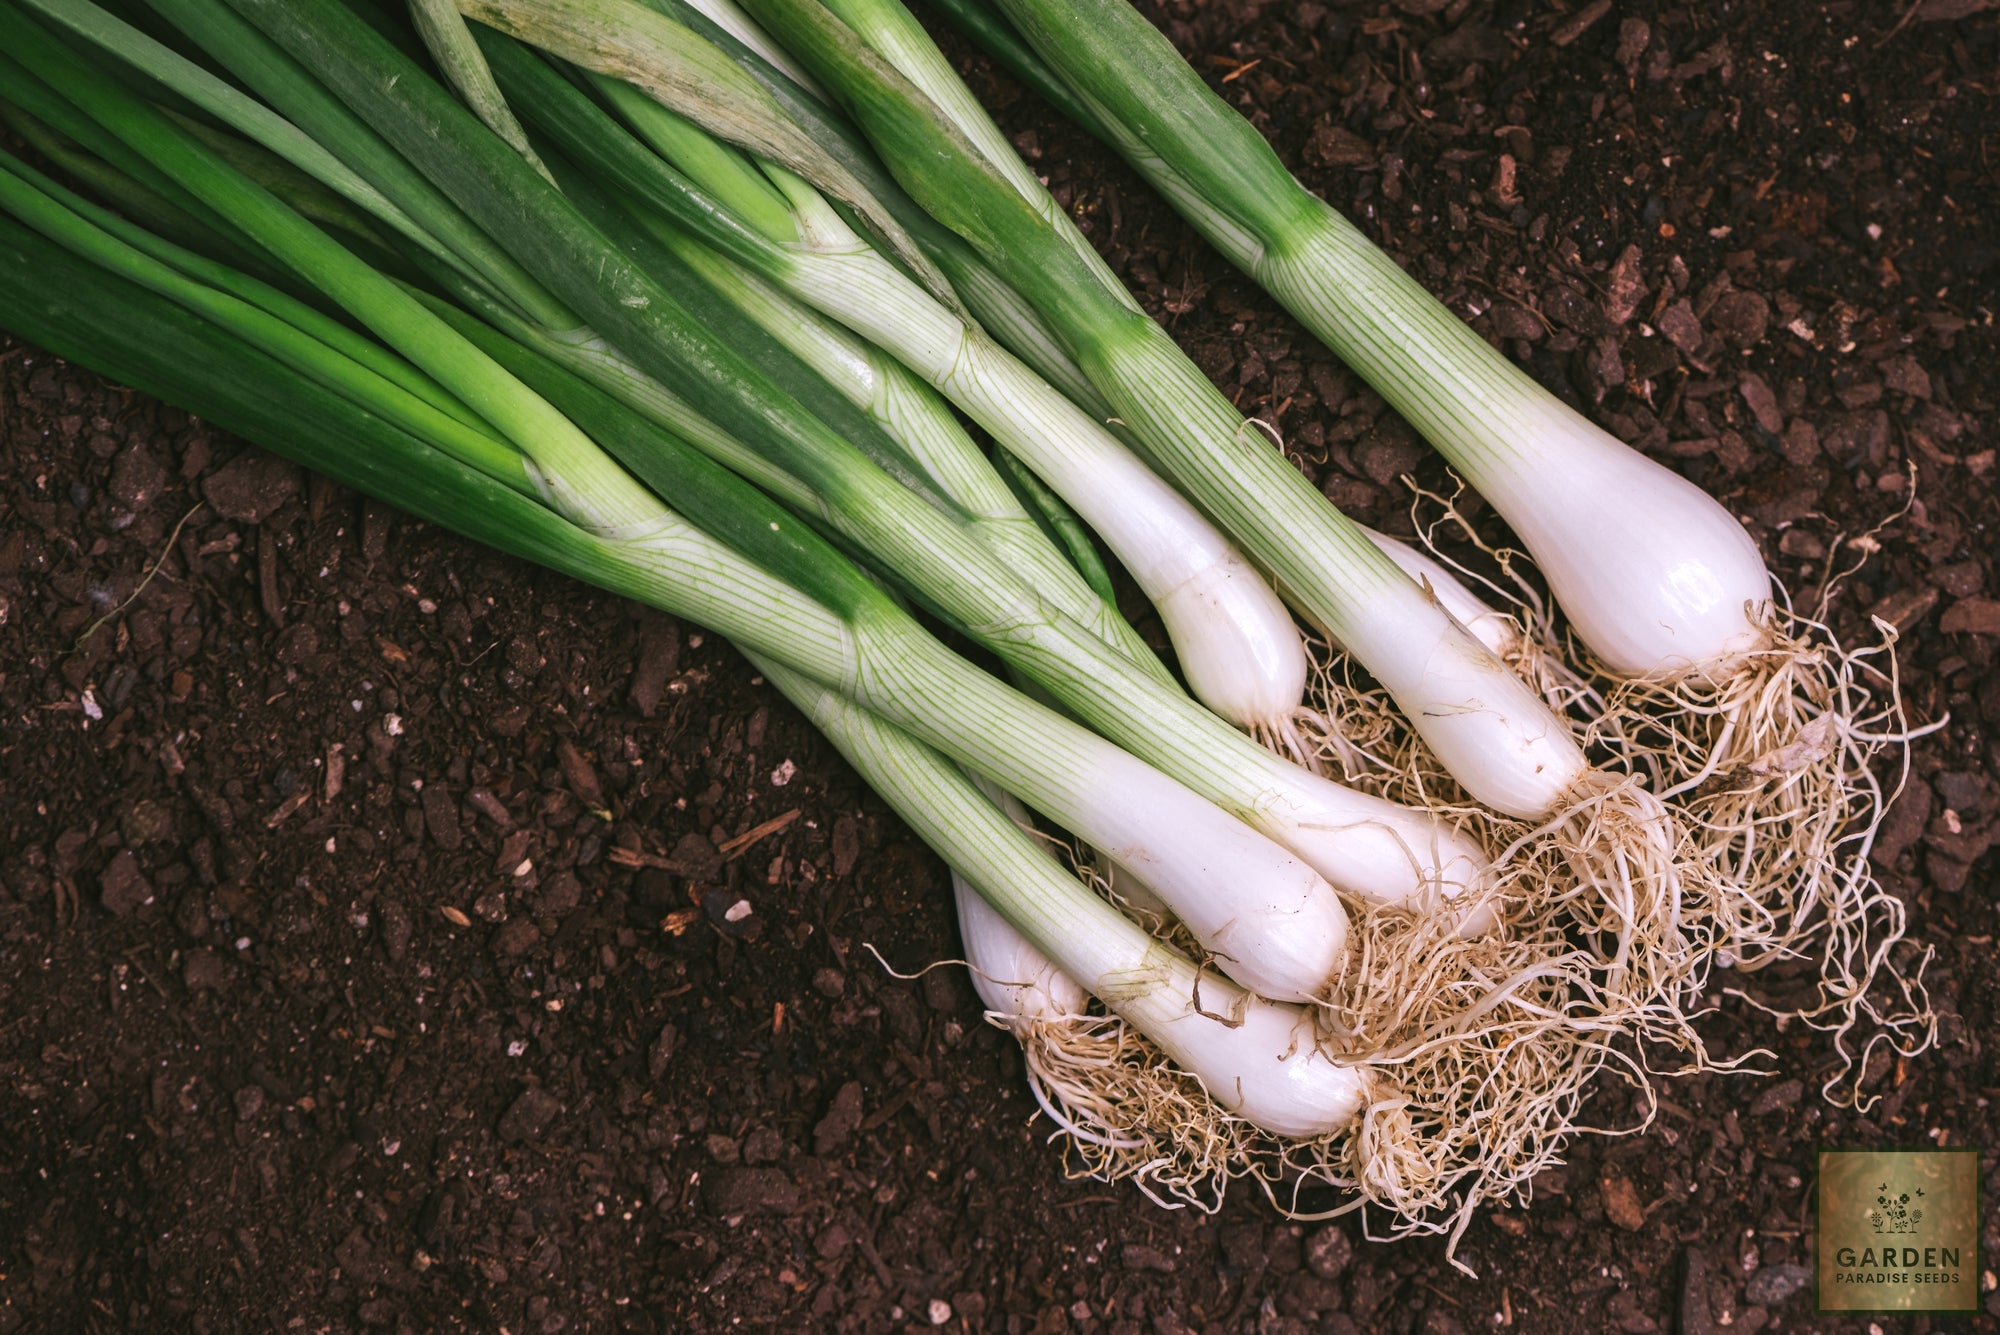 Vibrant Spring Green Onion Seeds - Grow fresh and aromatic green onions in your garden